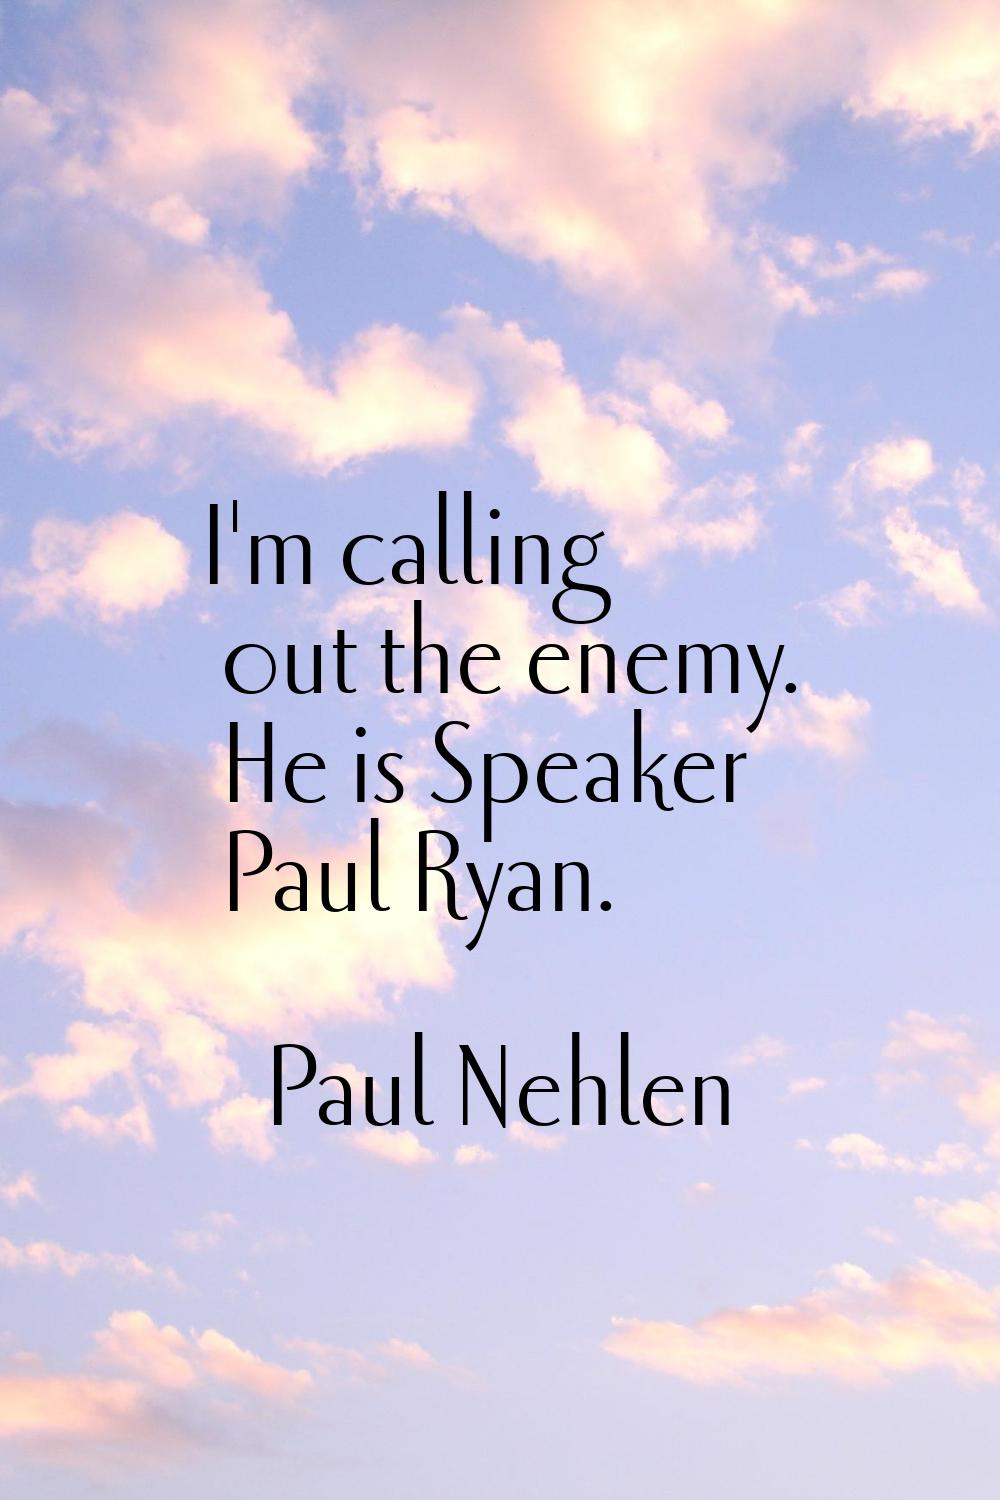 I'm calling out the enemy. He is Speaker Paul Ryan.